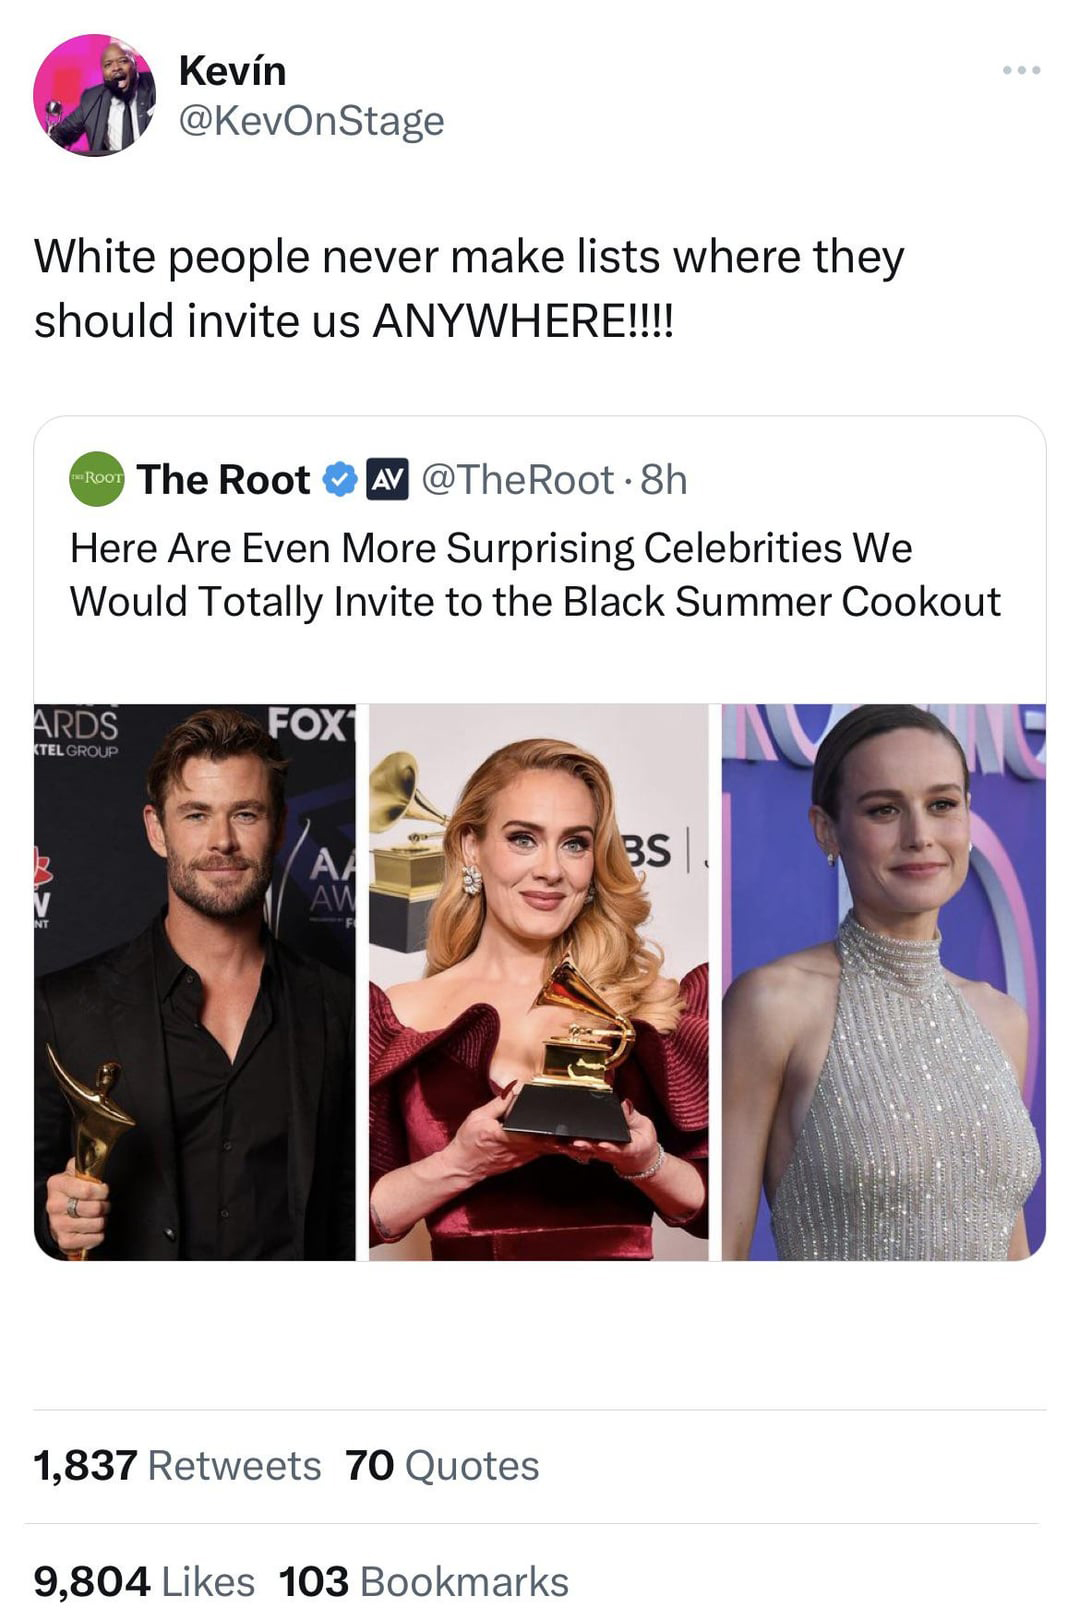 funny tweets and twitter memes - shoulder - Kevin White people never make lists where they should invite us Anywhere!!!! The Root A Here Are Even More Surprising Celebrities We Would Totally Invite to the Black Summer Cookout Ards Fox 1,837 70 Quotes 9,80